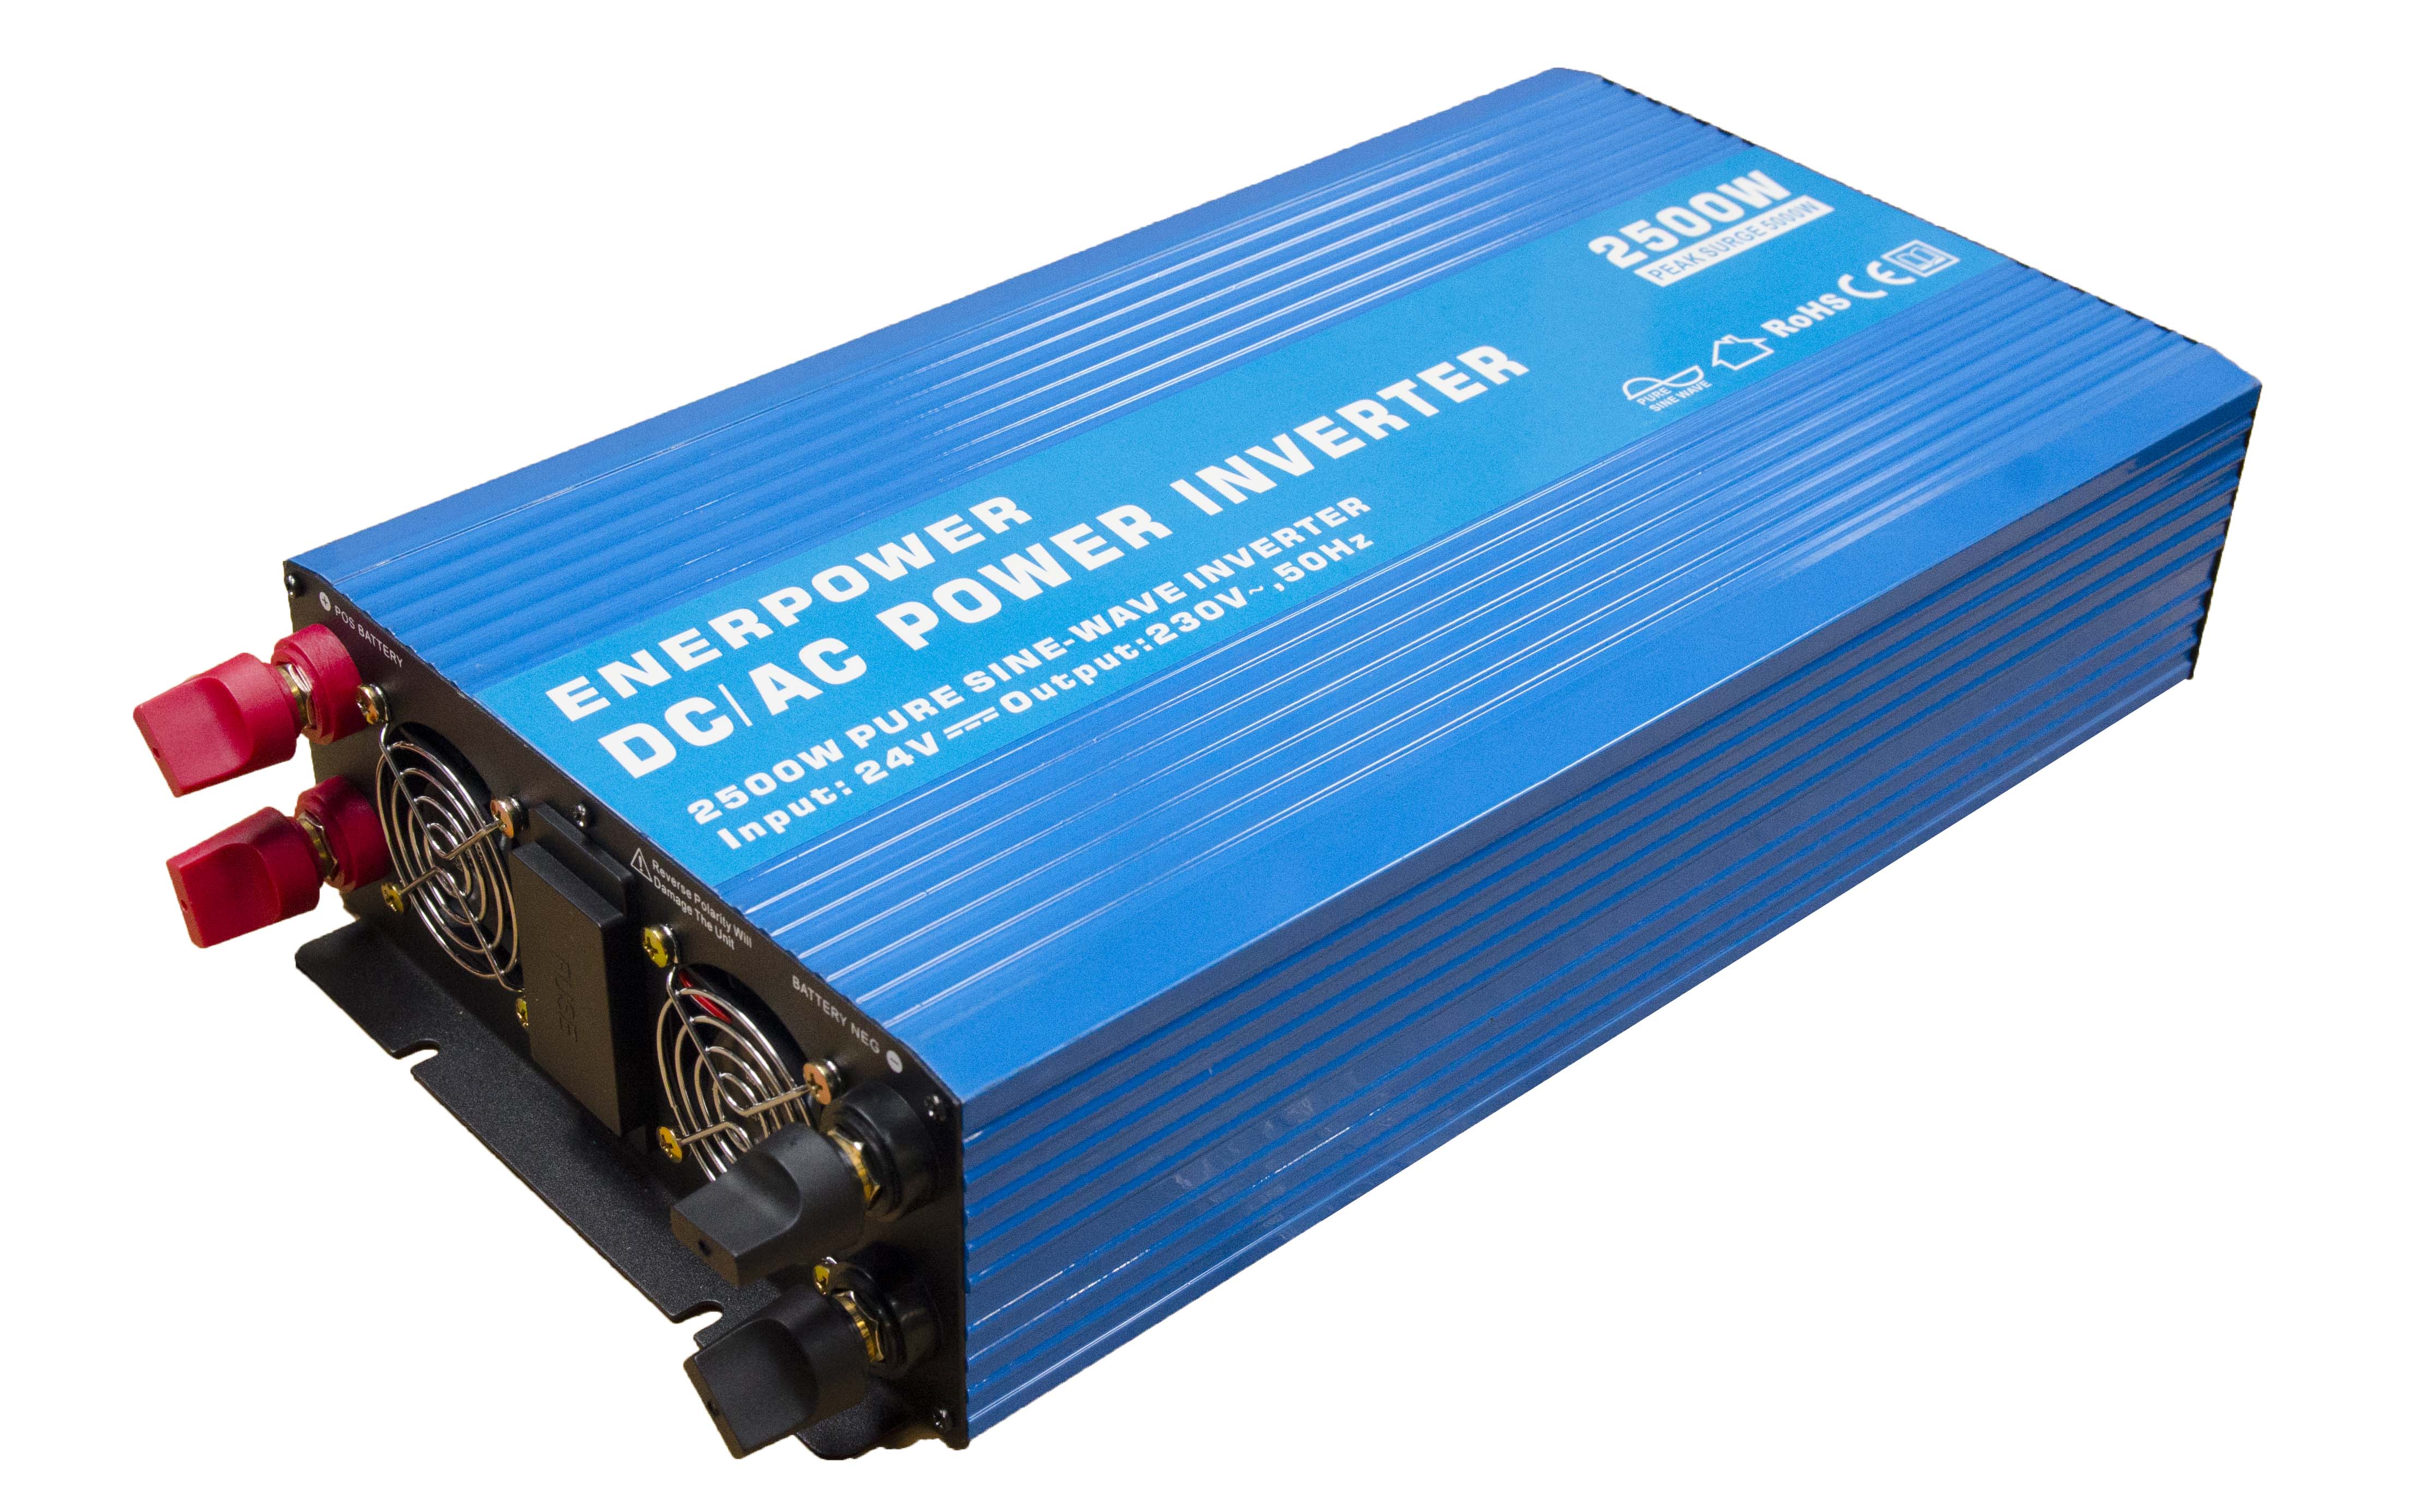 Hecho para recordar canción Tormento Inverter sine wave | Enerpower S.r.l. - Industrial Batteries and power  supply systems